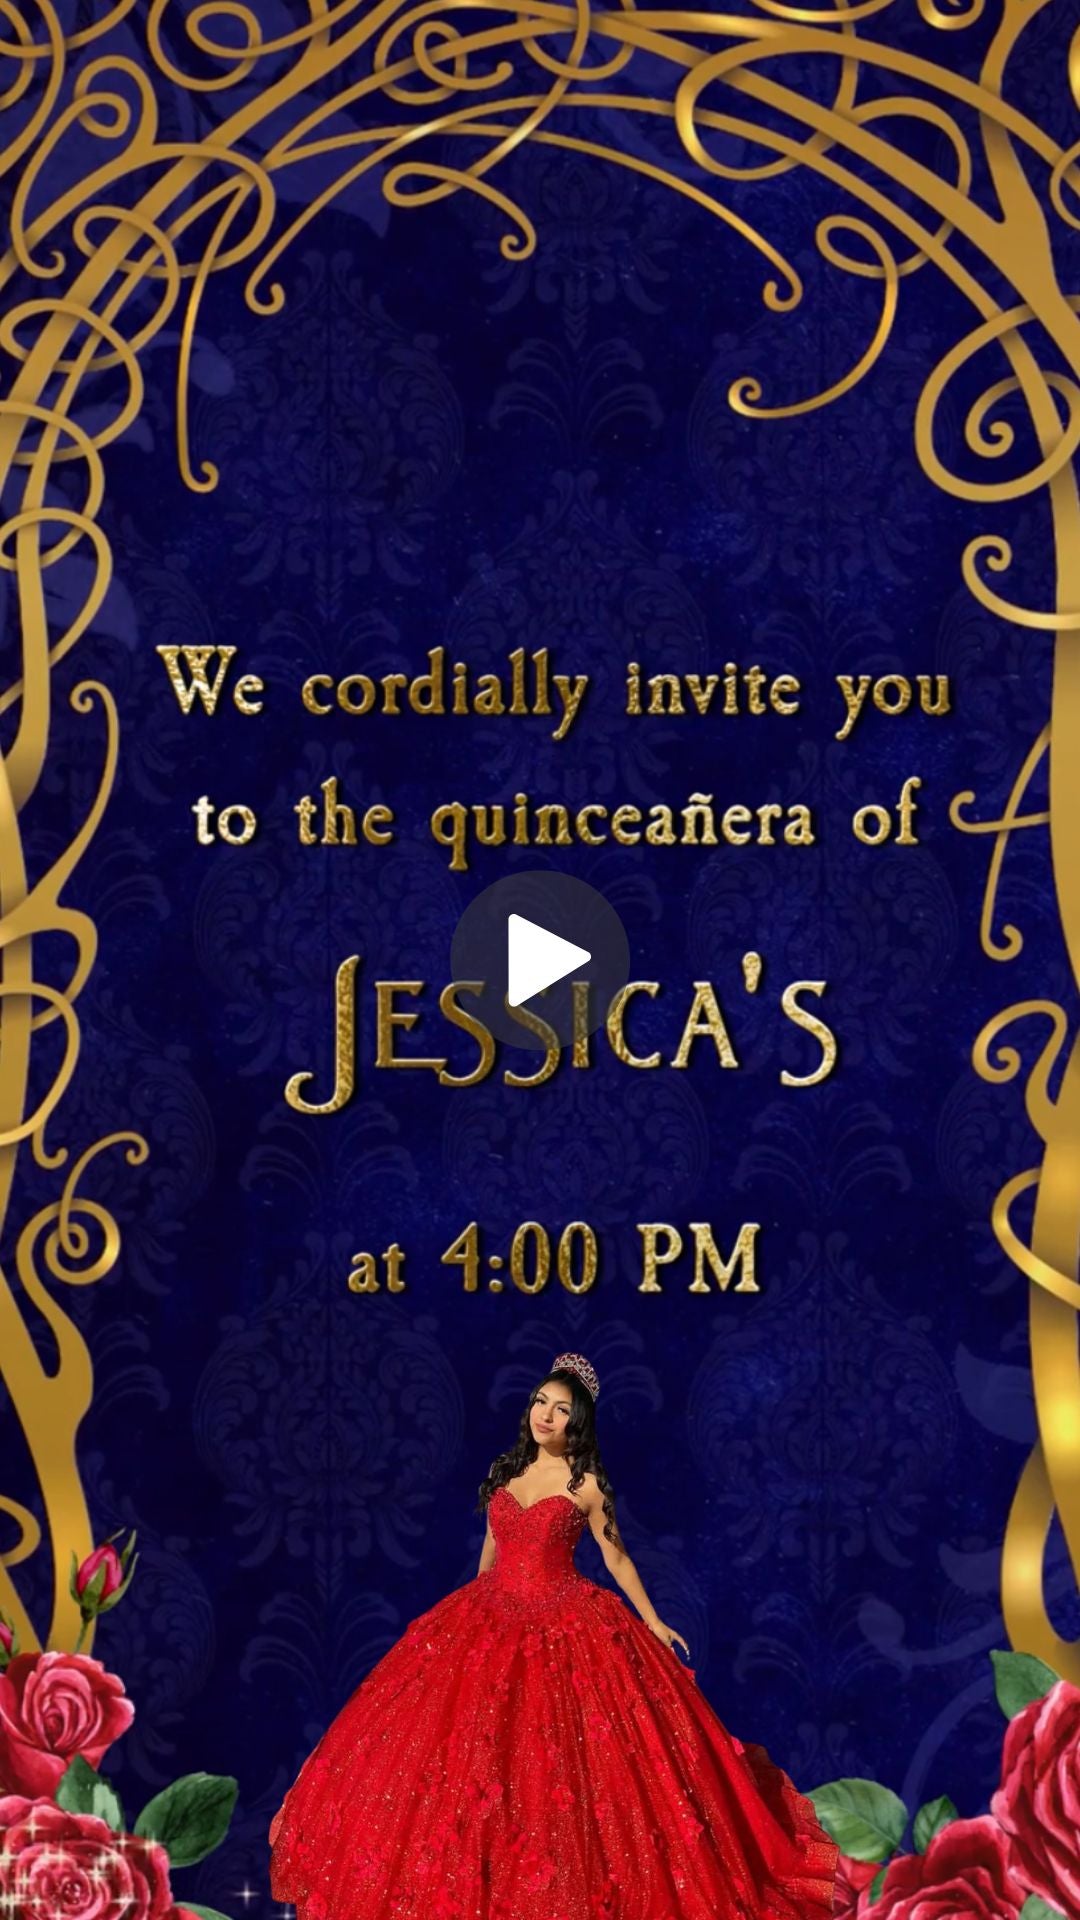 Beauty and the Beast Quinceañera Video Invitations - Red Dress Theme Sweet 15 Enchanted Rose Quince Años Invite